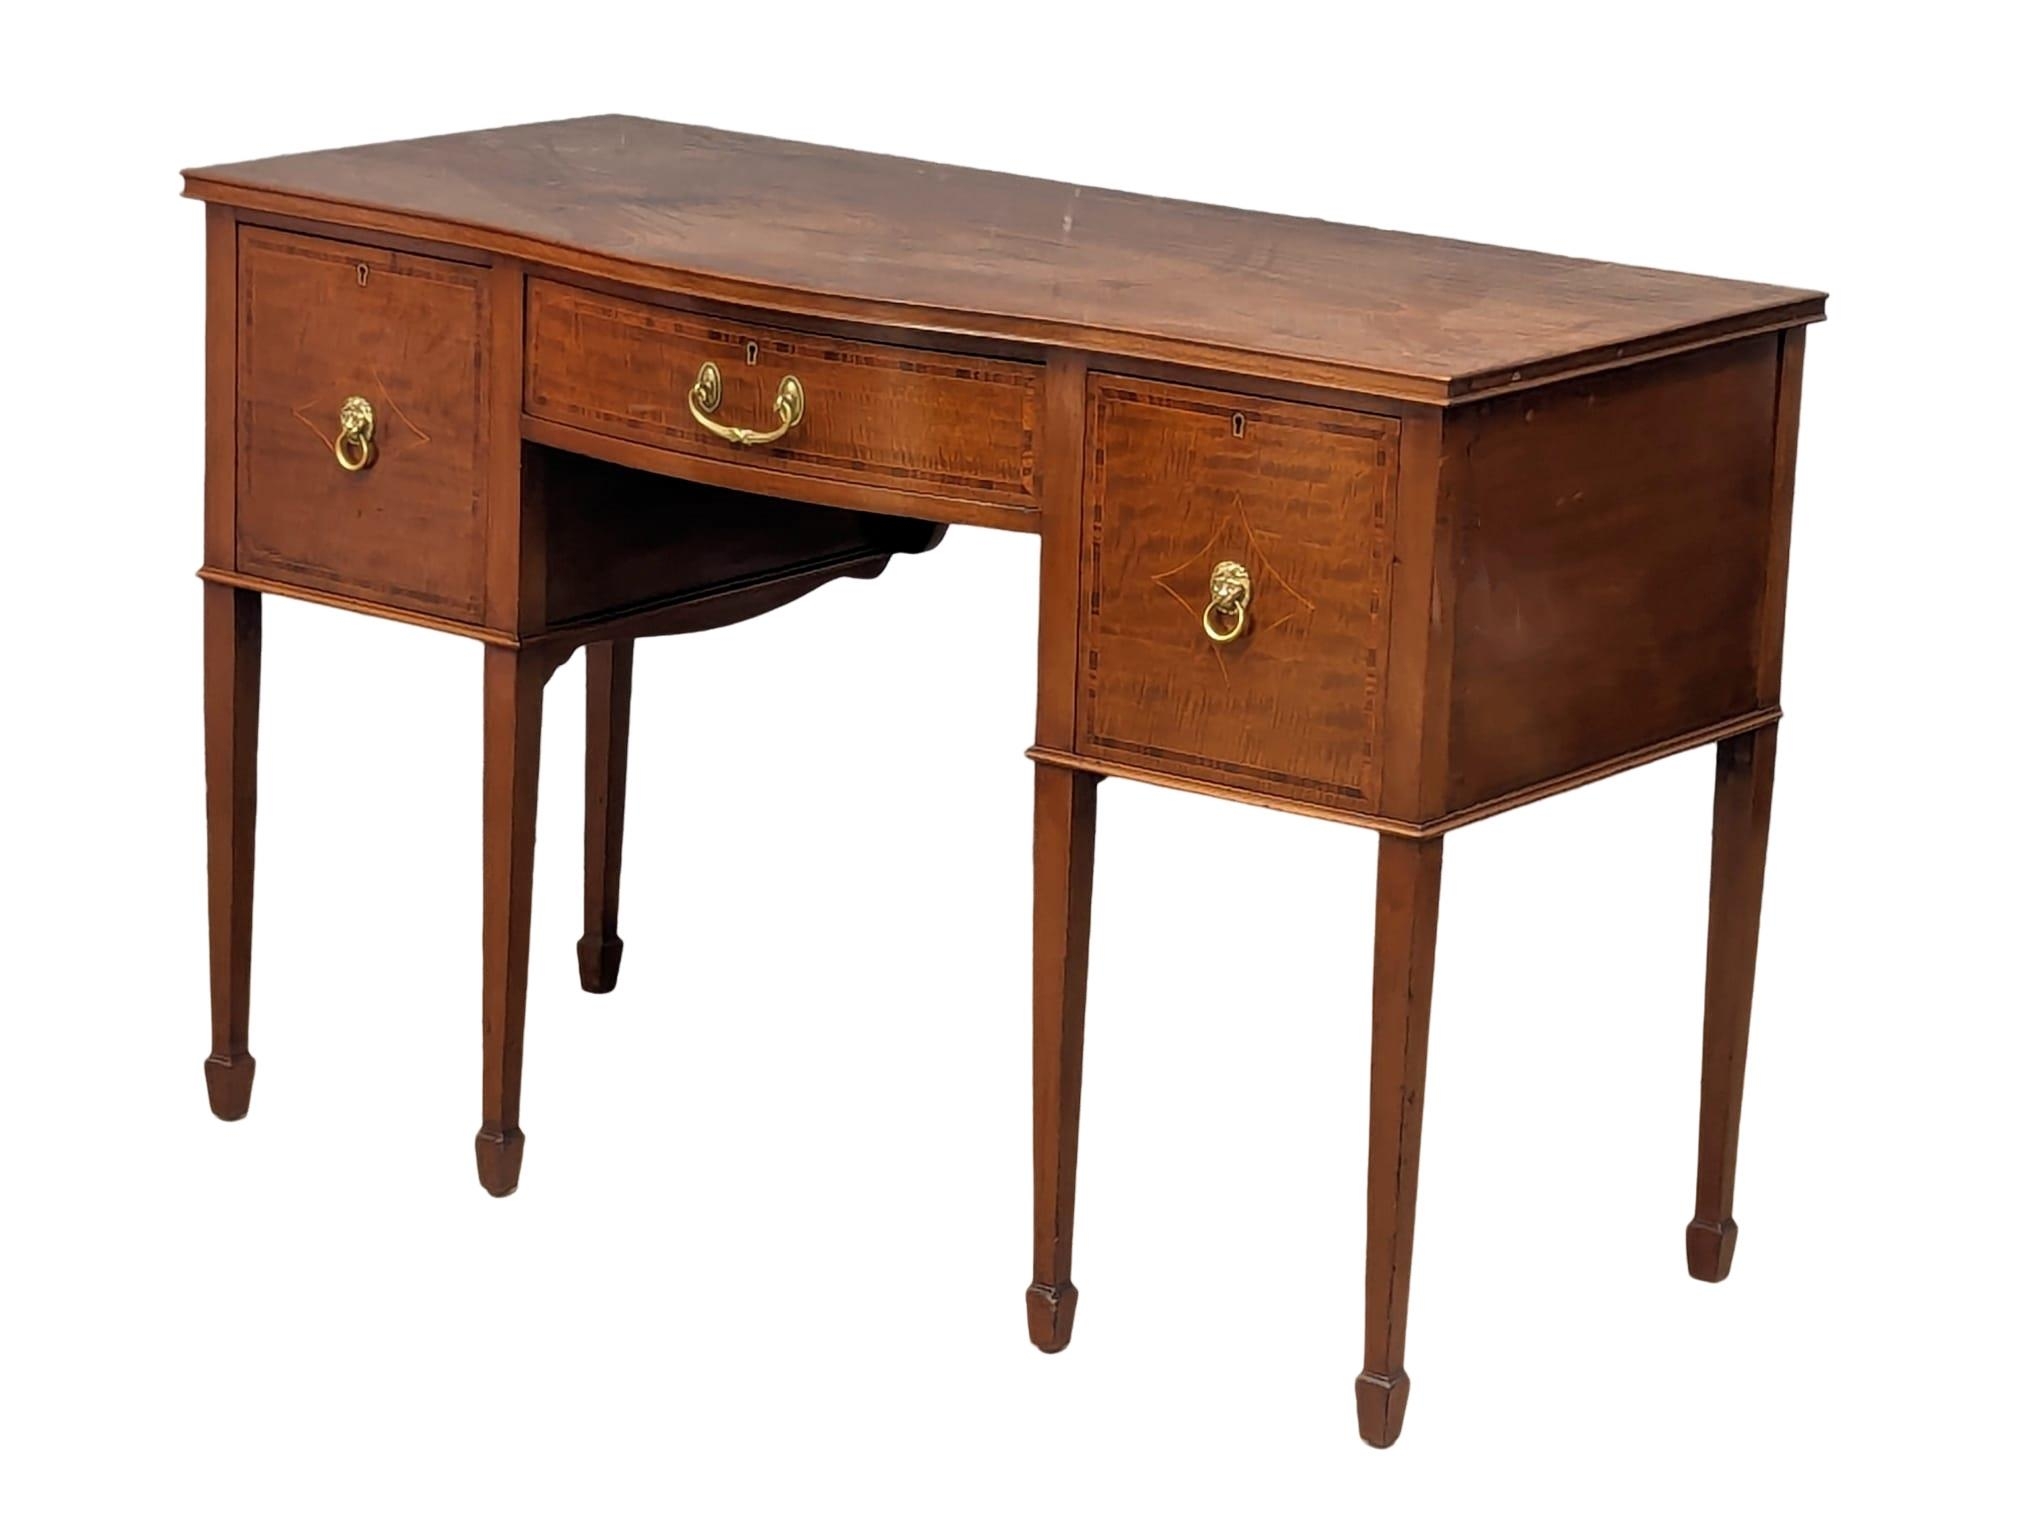 An Early 20th Century Sheraton Revival inlaid mahogany Serpentine front desk / side table. 122x57.